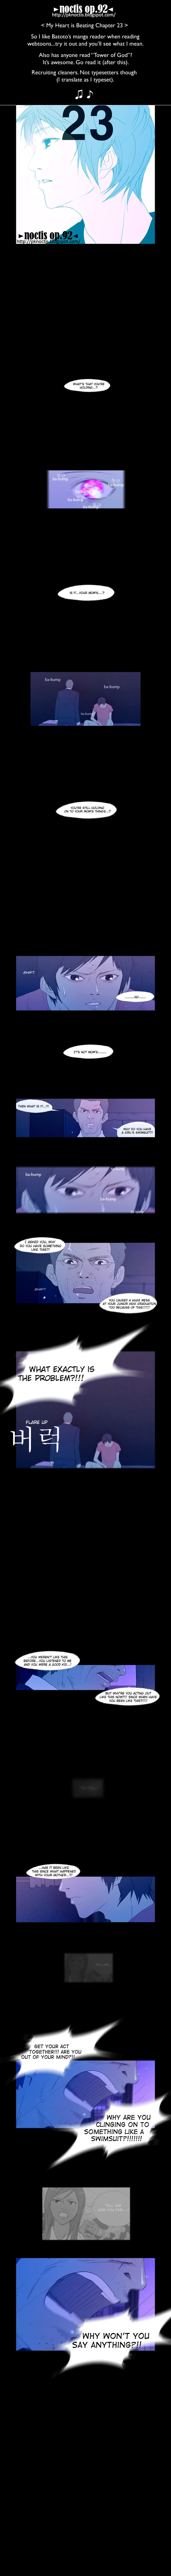 My Heart Is Beating - Page 1